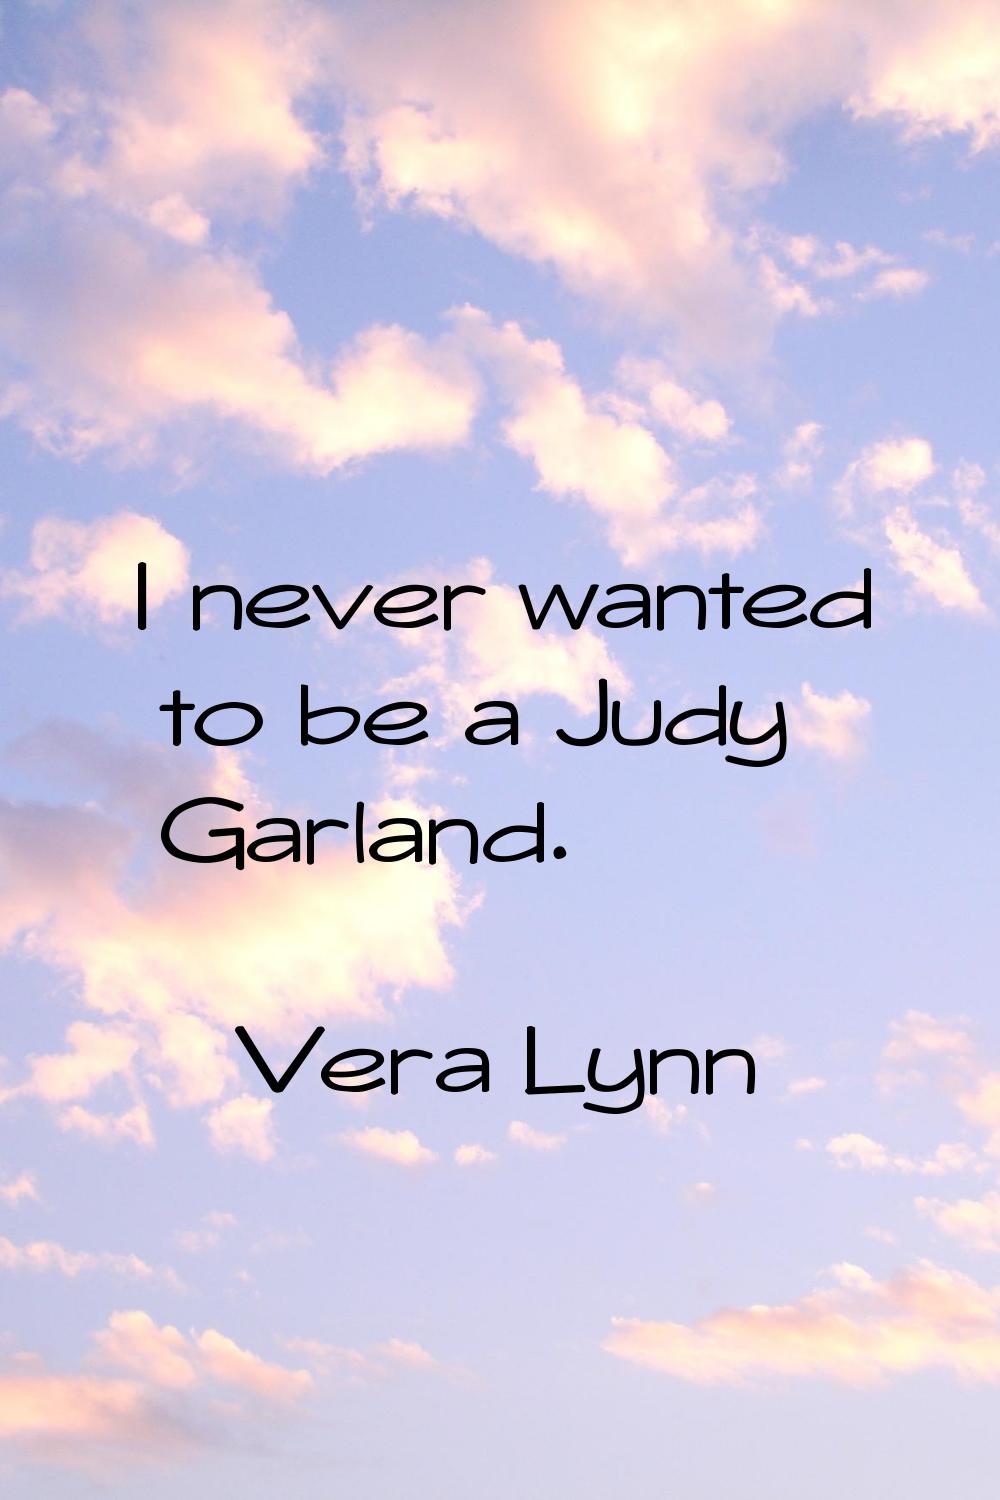 I never wanted to be a Judy Garland.